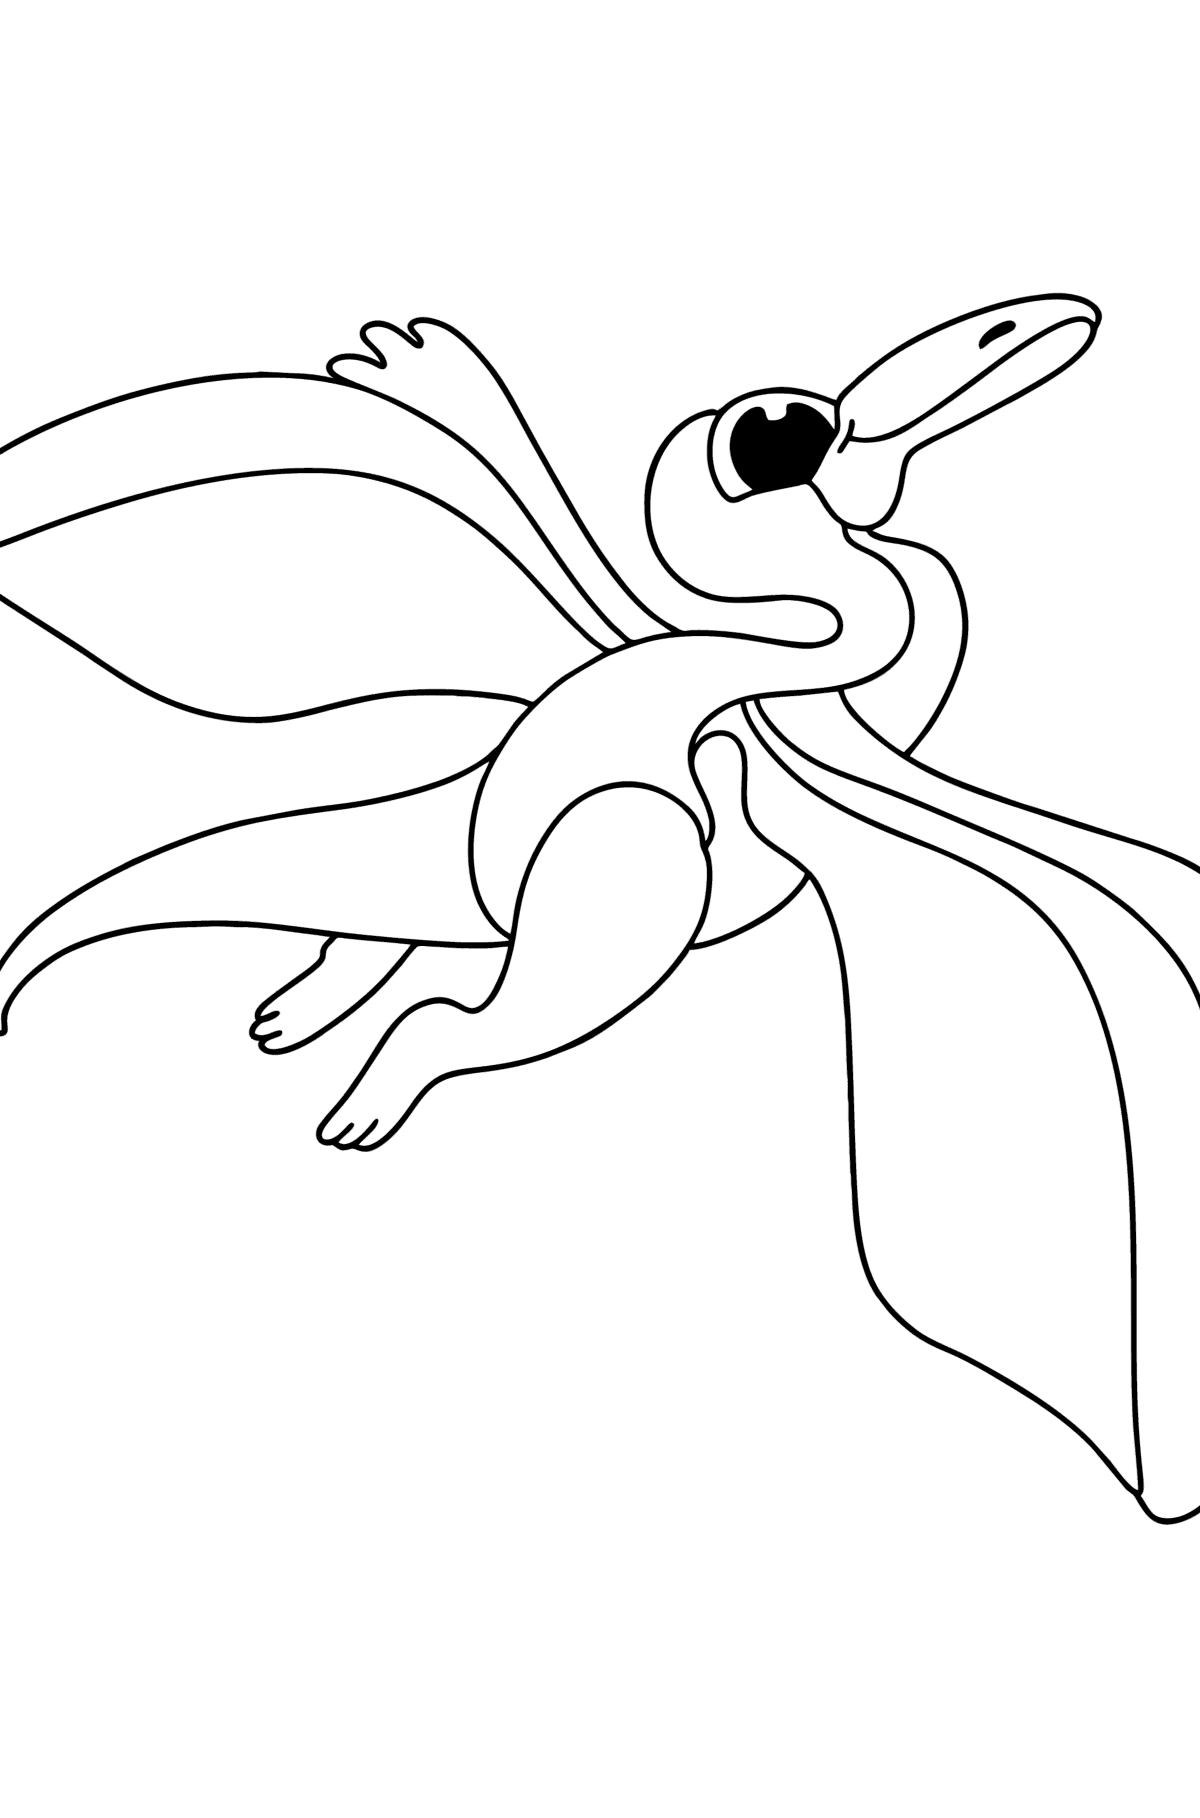 Pterodactyl coloring page - Coloring Pages for Kids